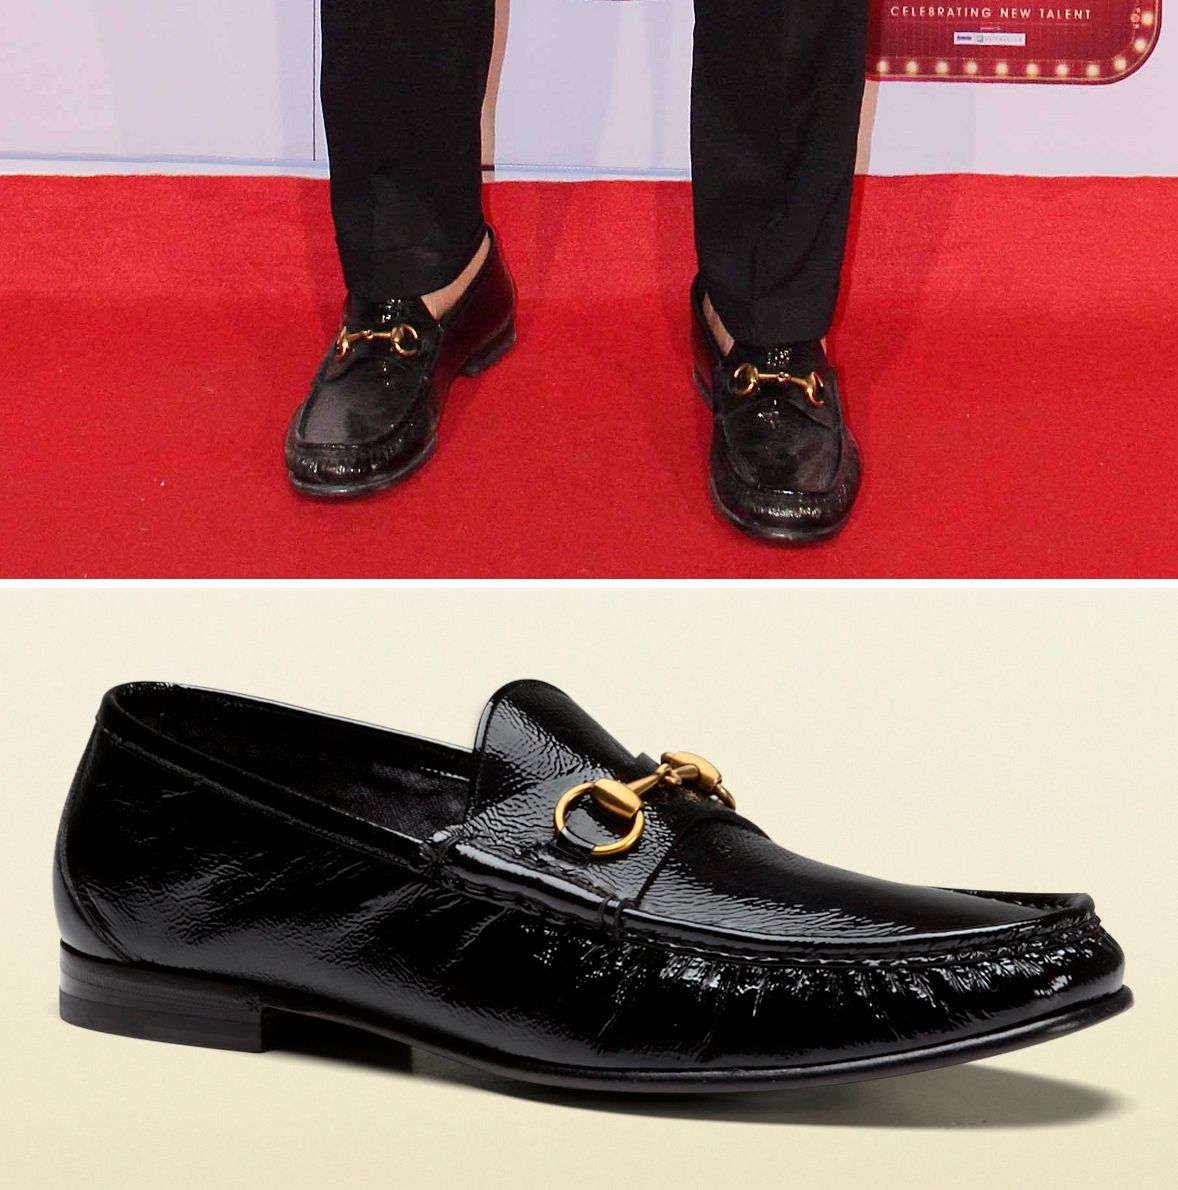 Varun Dhawan in Gucci 1953 horsebit loafer in black patent leather at the 11th Annual Stardust Awards on January 26, 2013 (Photo courtesy | Gucci)